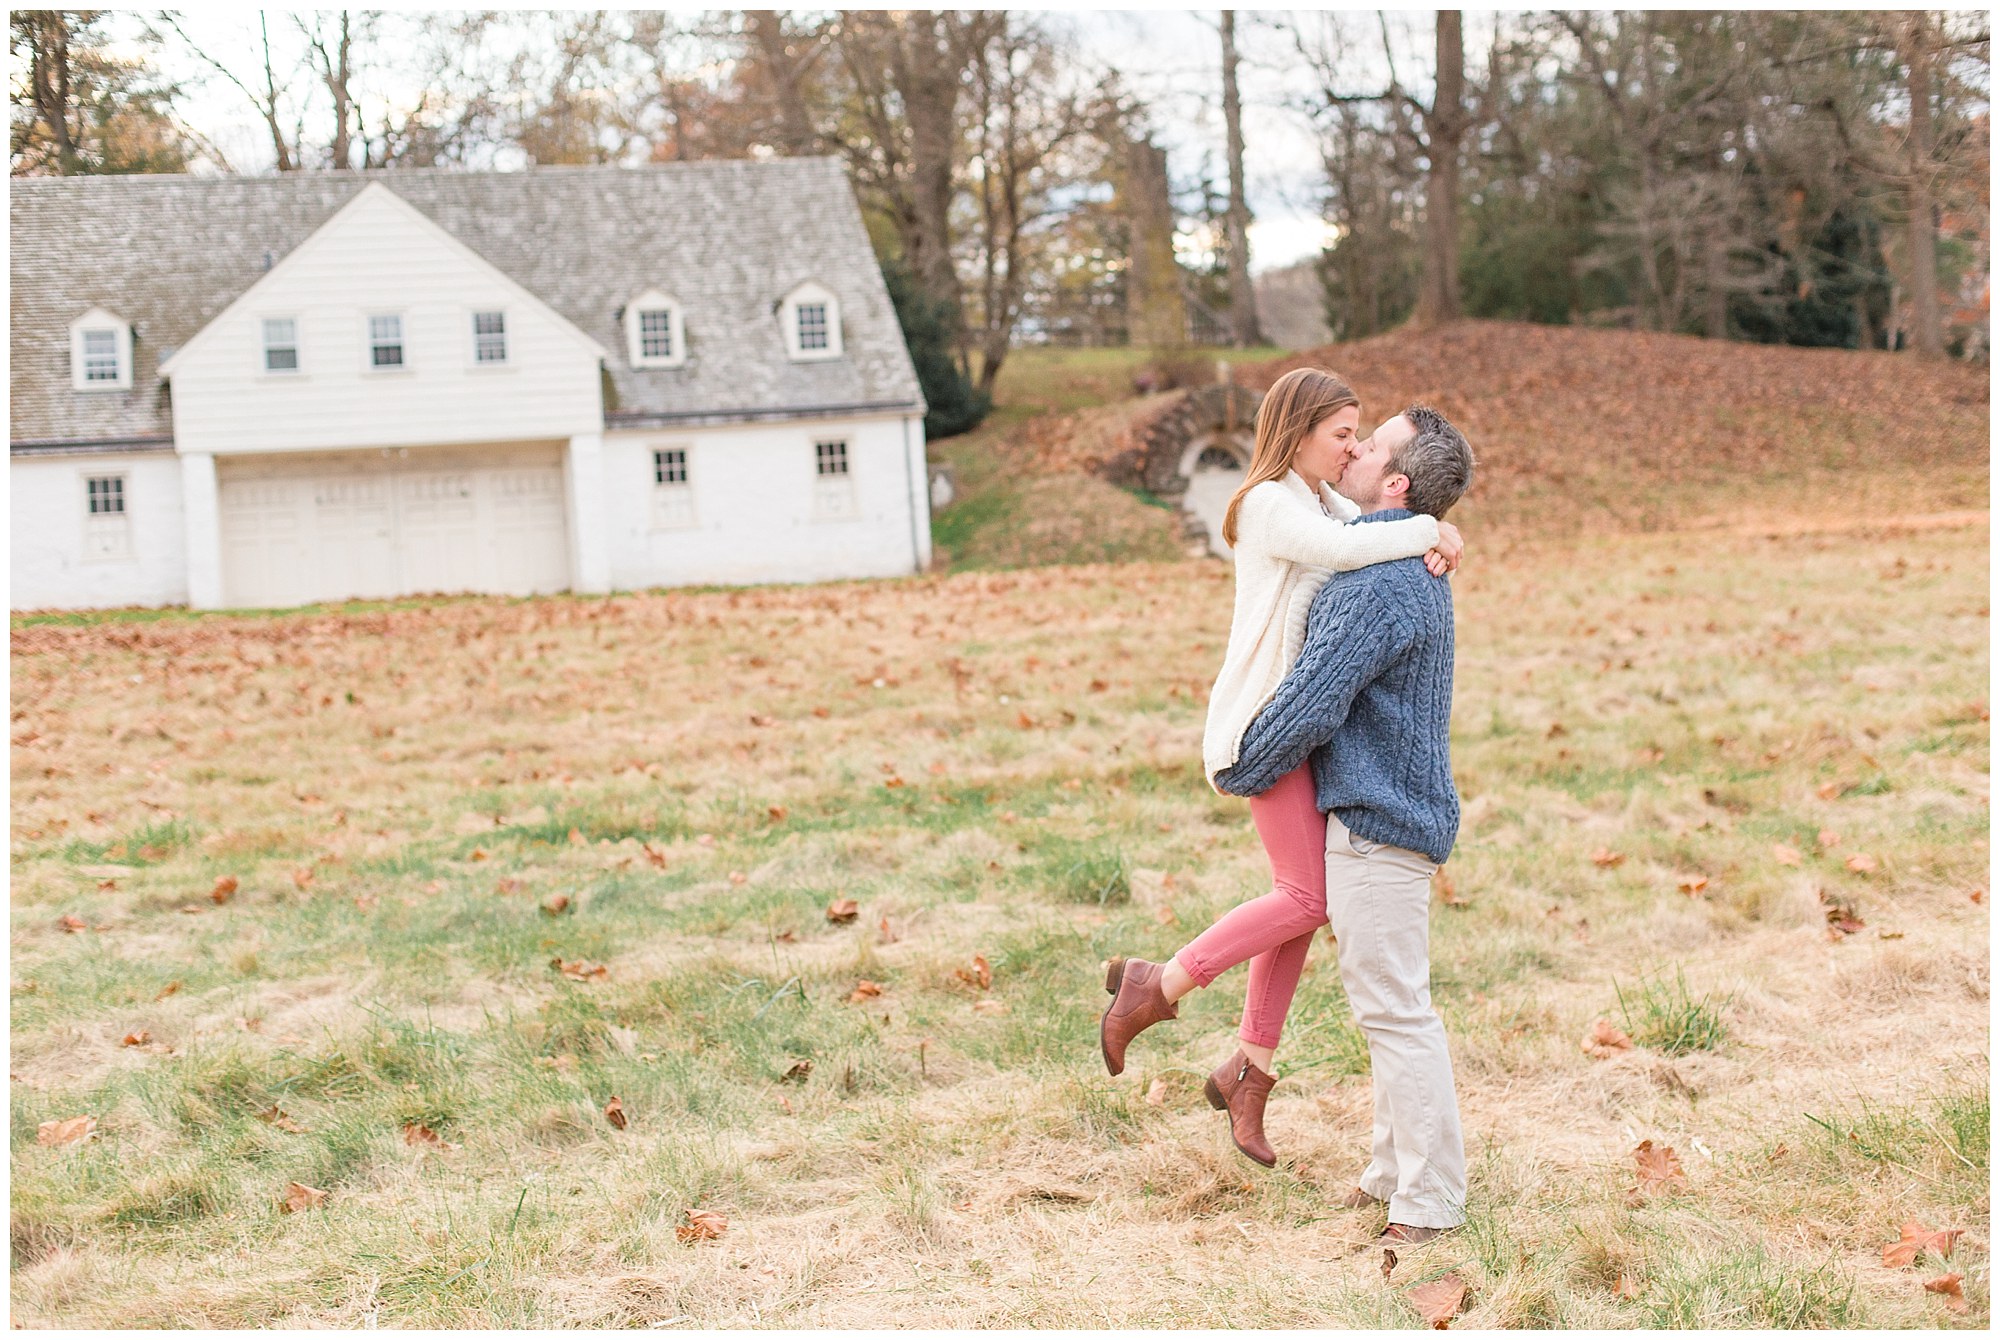 Pat & Emily's Colorful November Engagement at Philander Chase Knox Estate in Valley Forge Park Photos